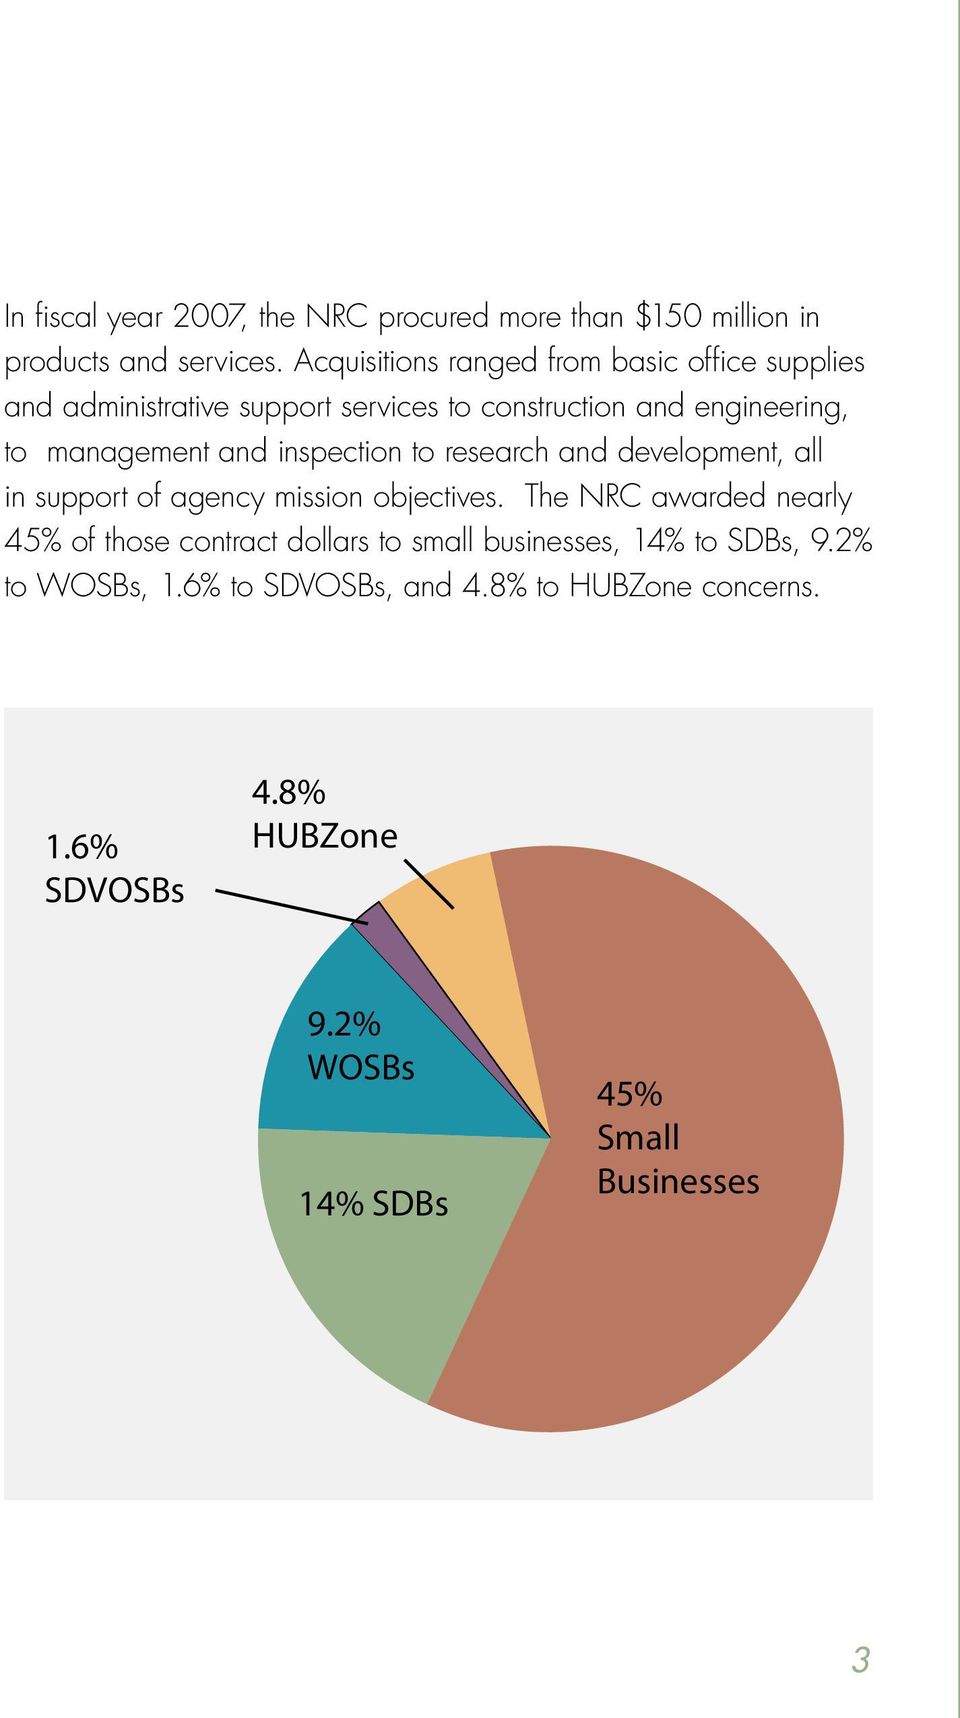 development, all in support of agency mission objectives. The NRC awarded nearly 45% of those contract dollars to small businesses, 14% to SDBs, 9.2% to WOSBs, 1.